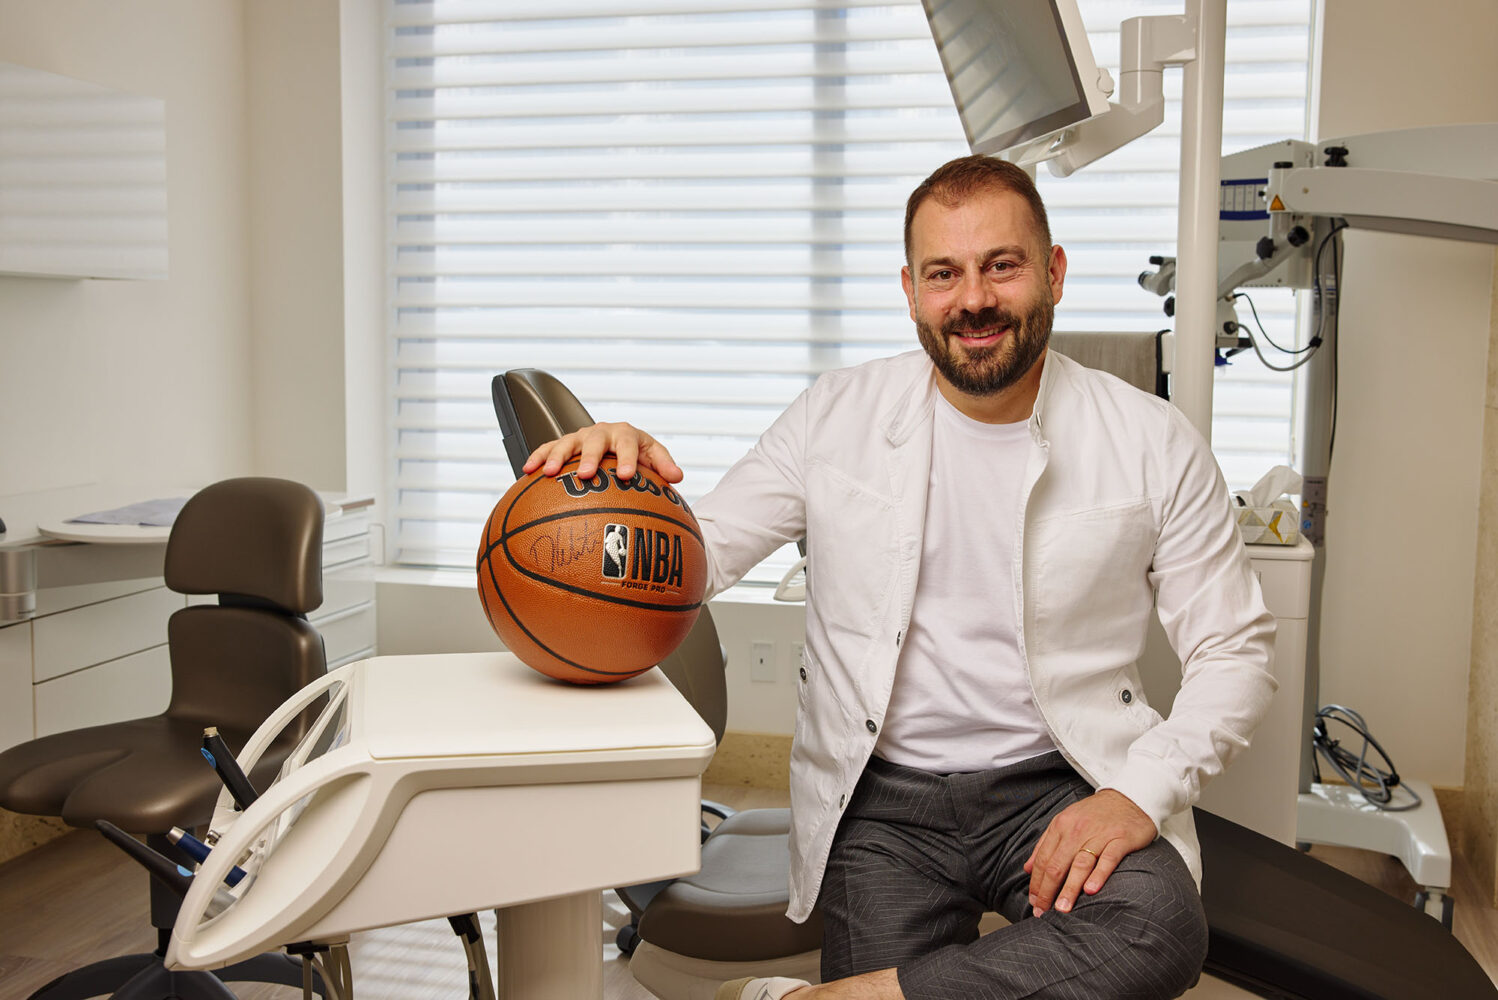 Photo: A picture of a dentist in a white coat smiling and posing with a basketball in his dental office